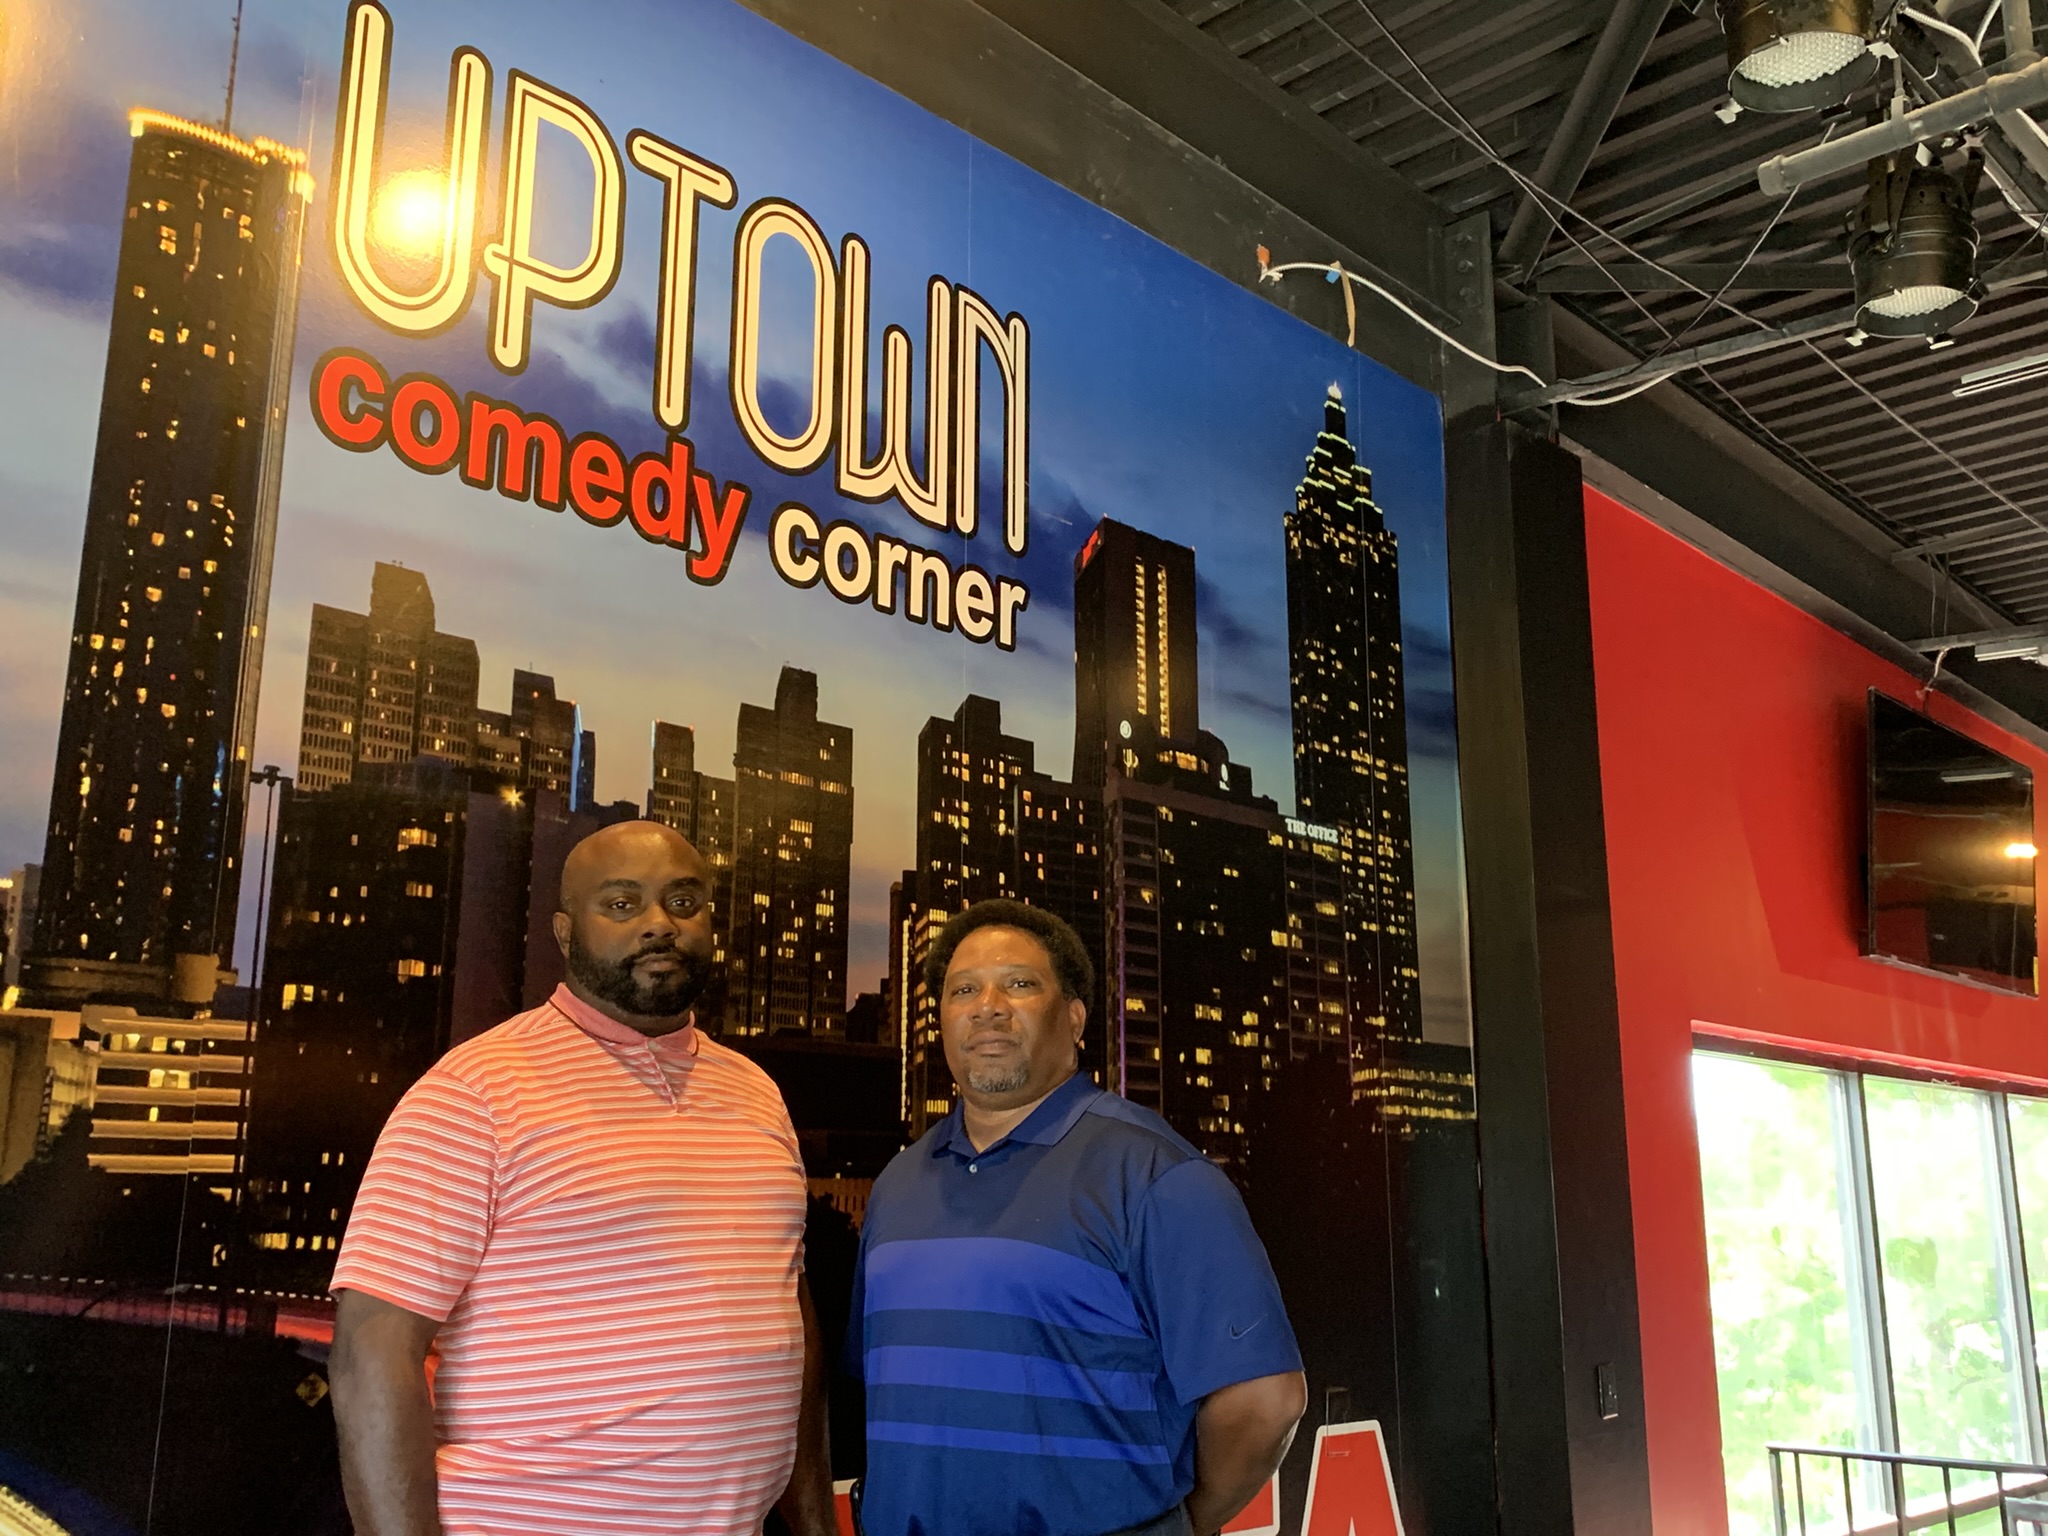 Uptown Comedy Corner reopens in new location in Hapeville image